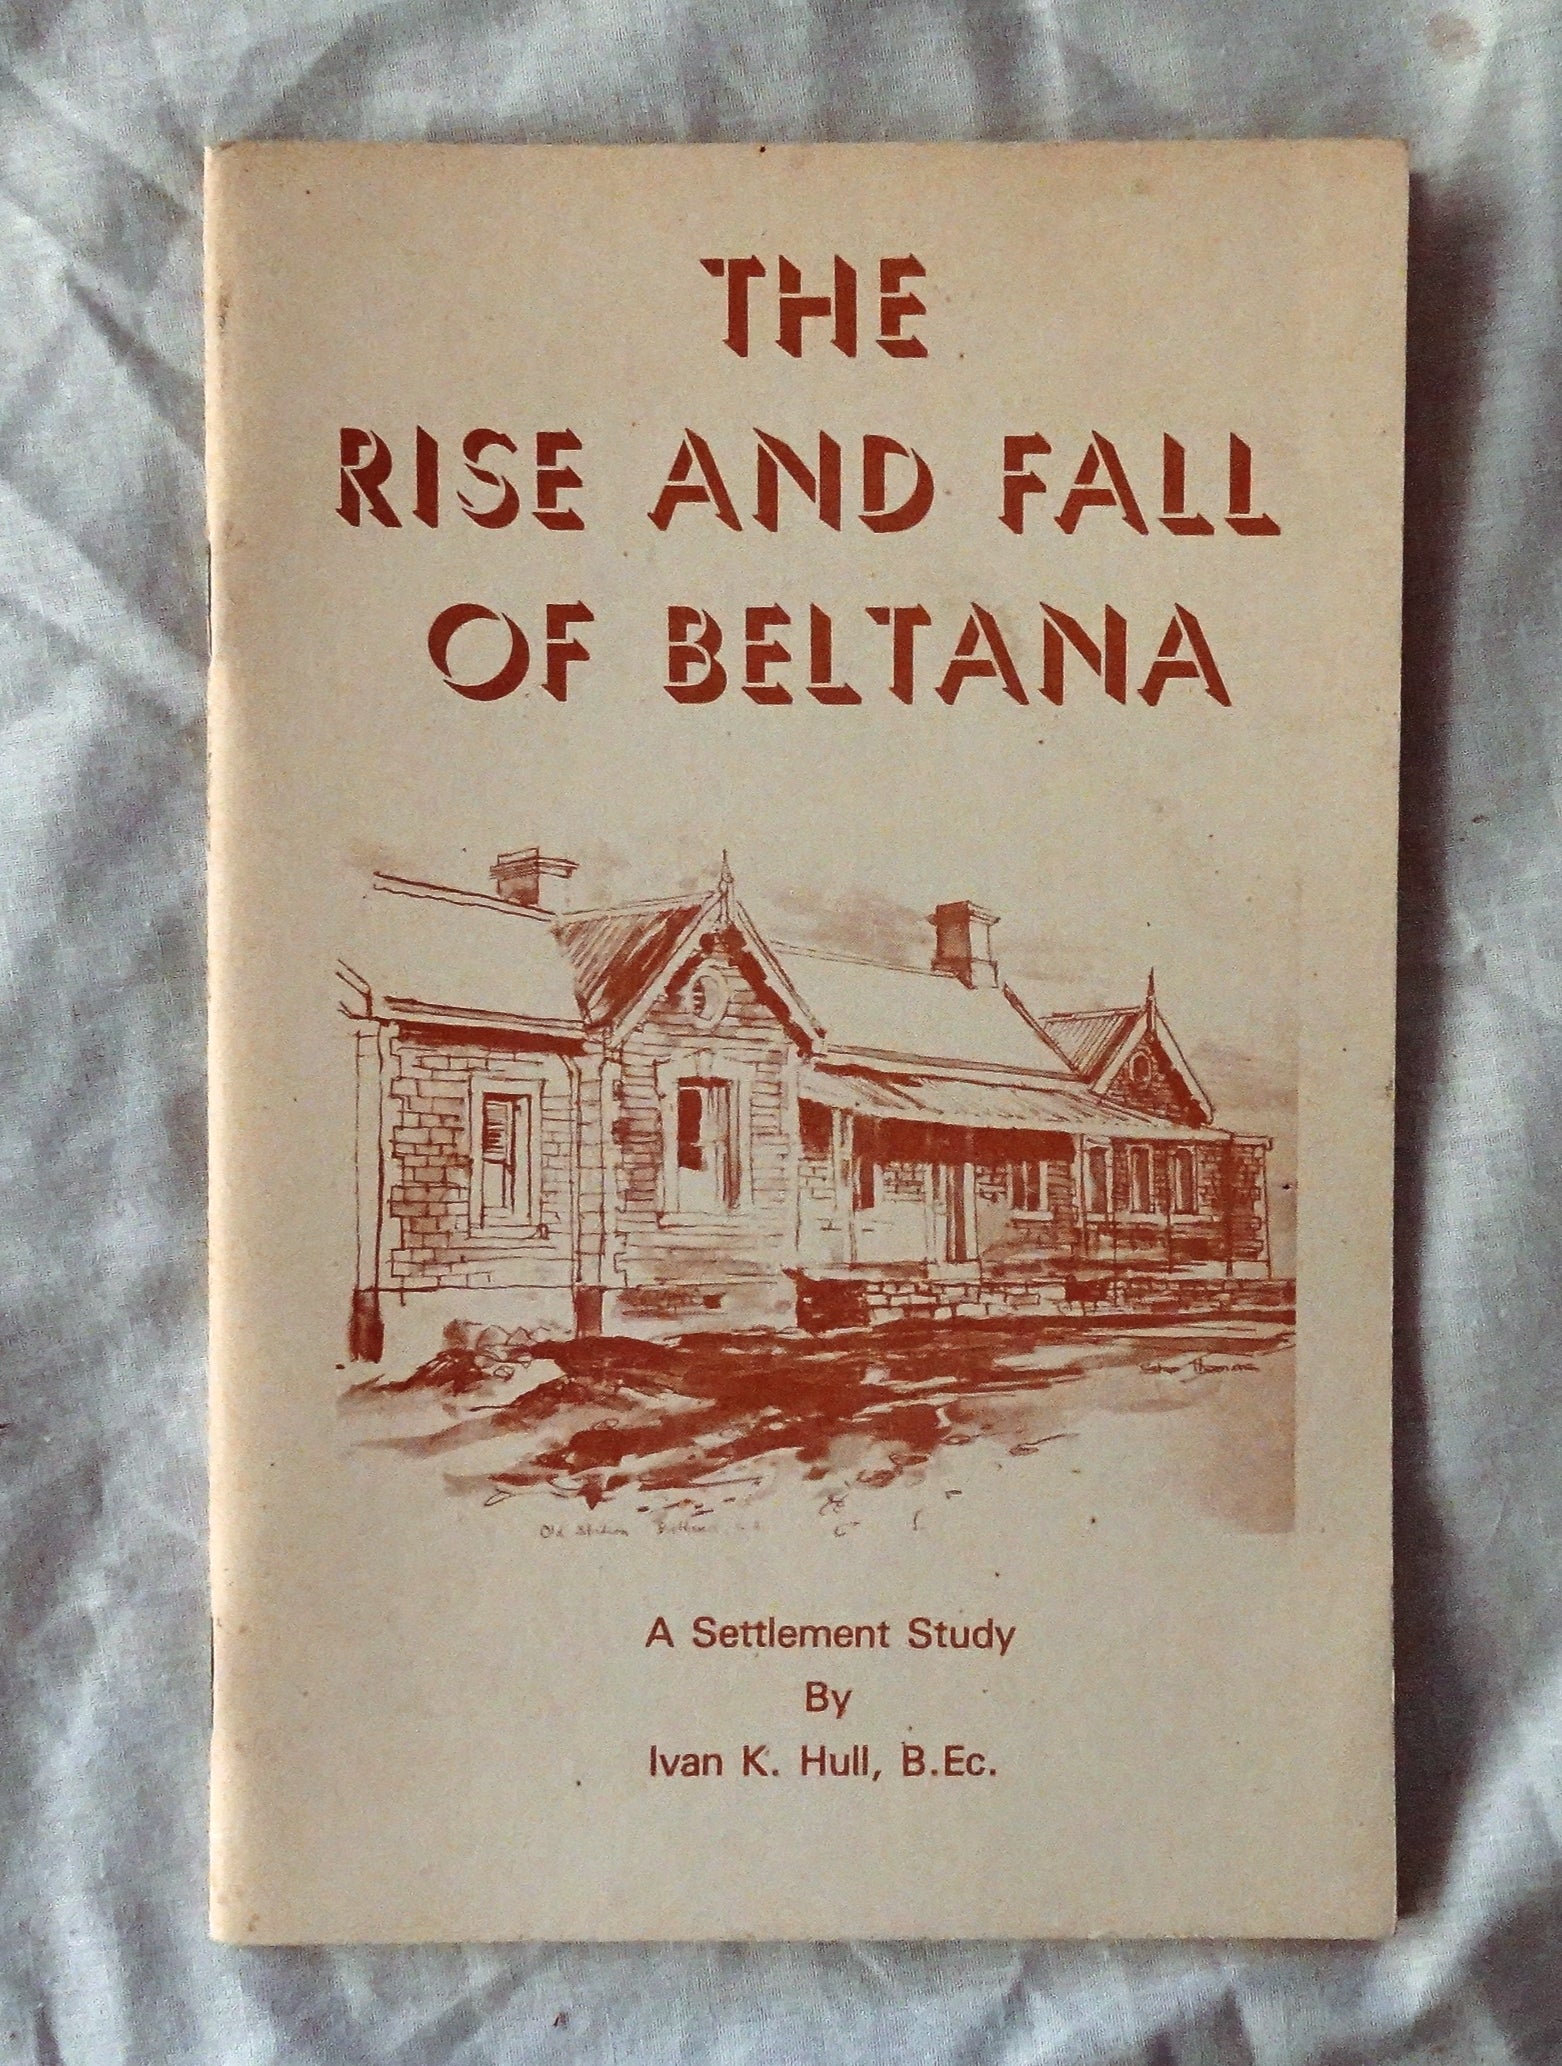 The Rise and Fall of Beltana  A Settlement Study  by Ivan K. Hull